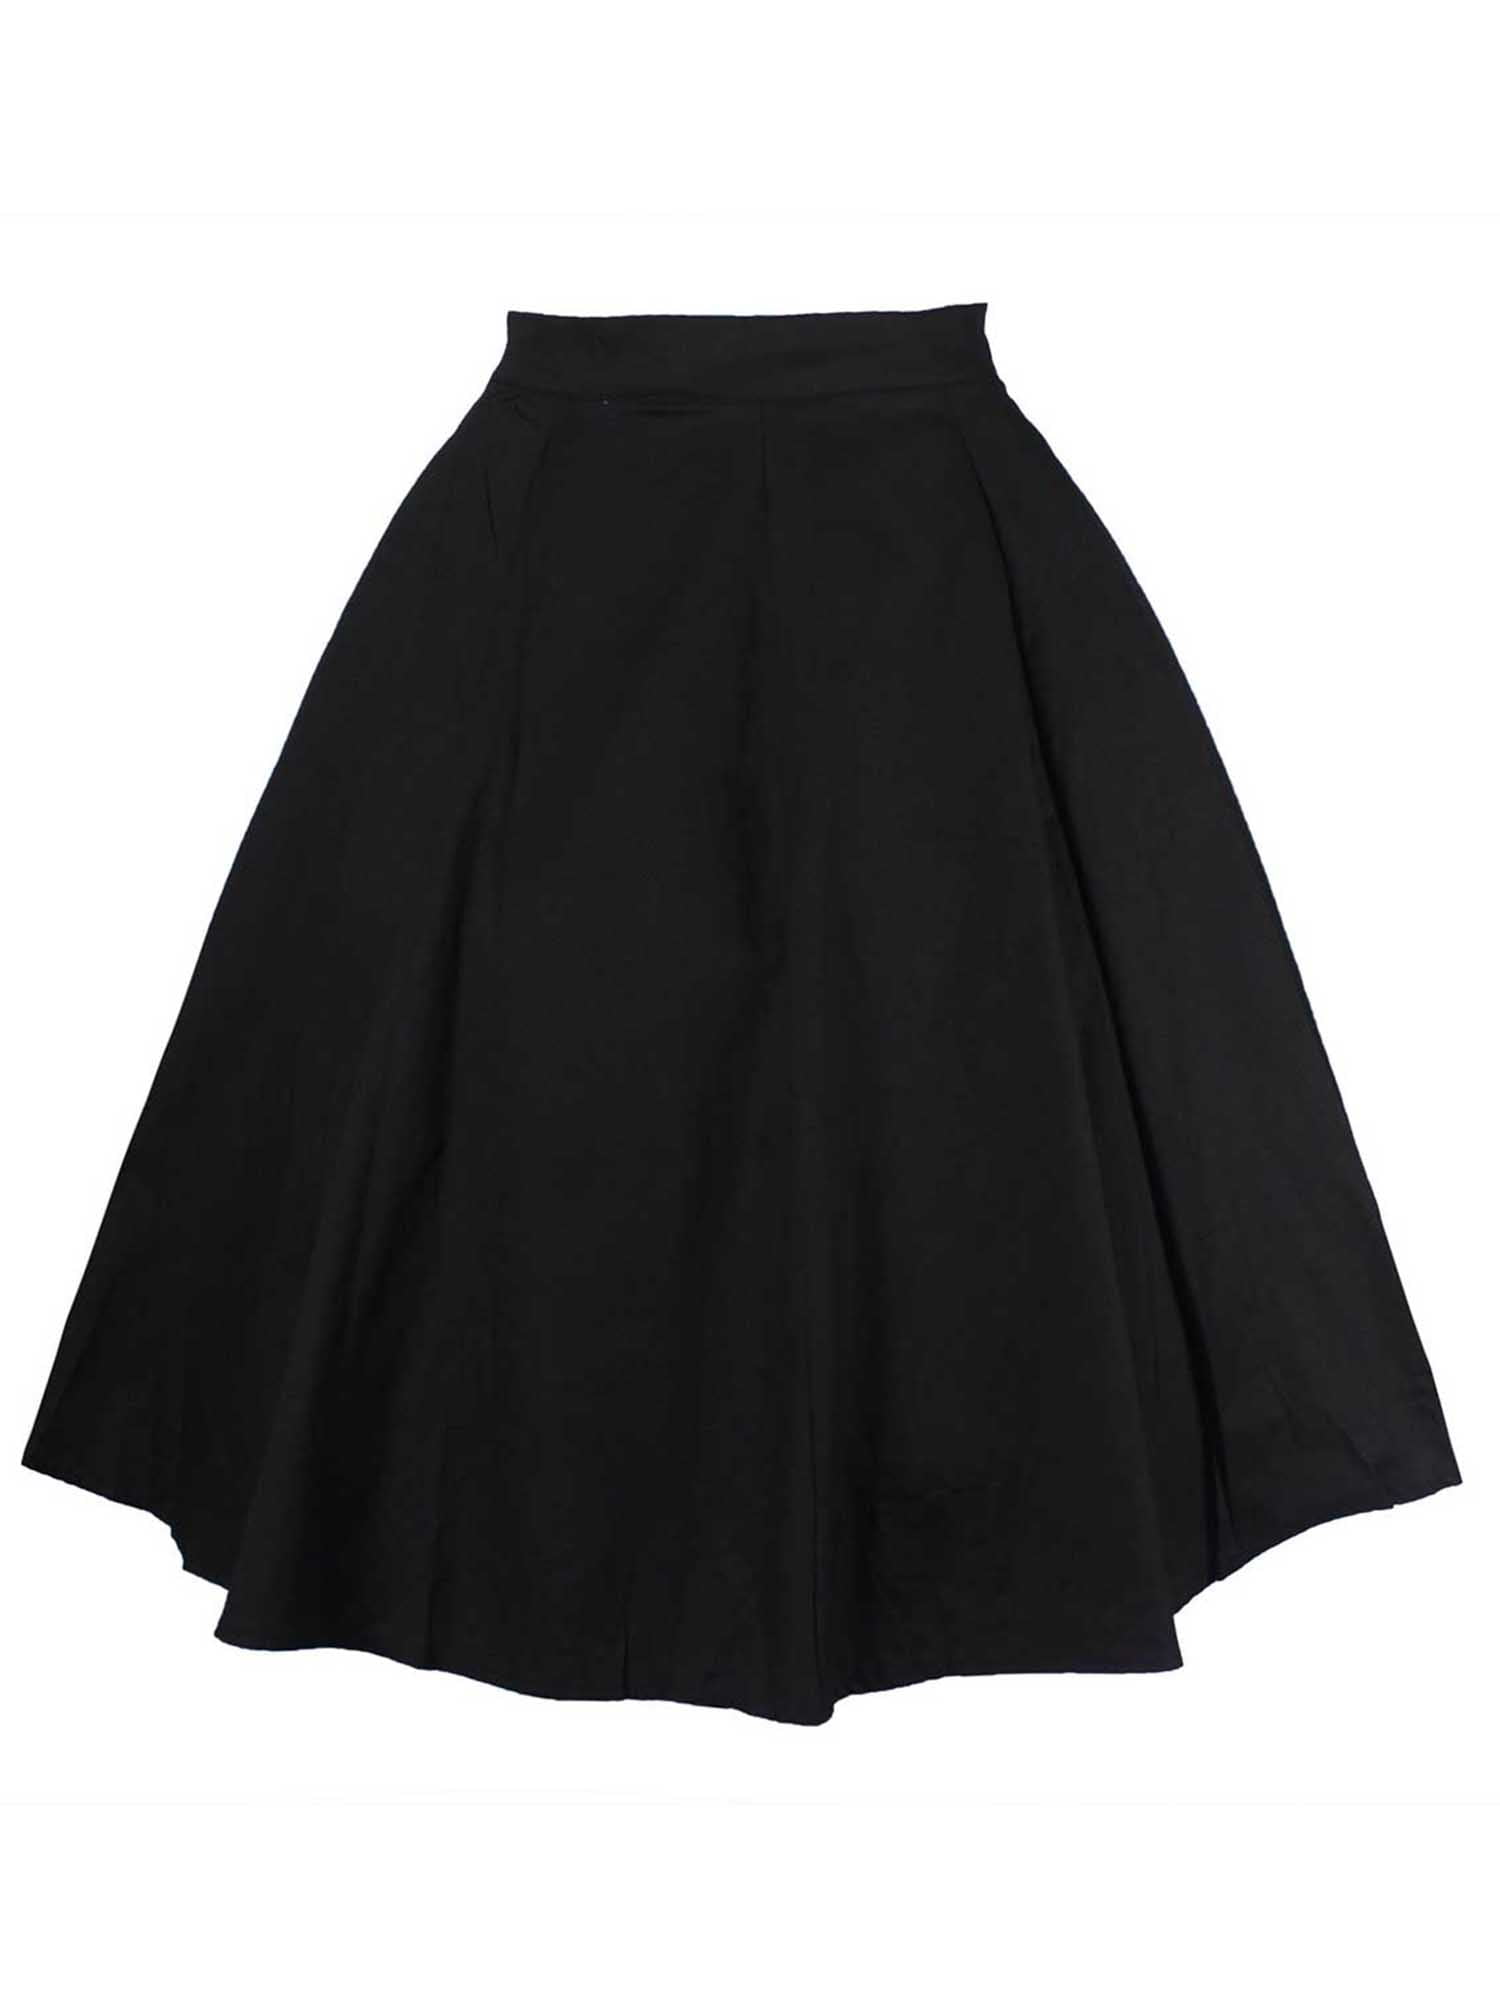 Sexy Dance - Women High Waist Vintage A-line Cocktail Party Swing Skirt ...